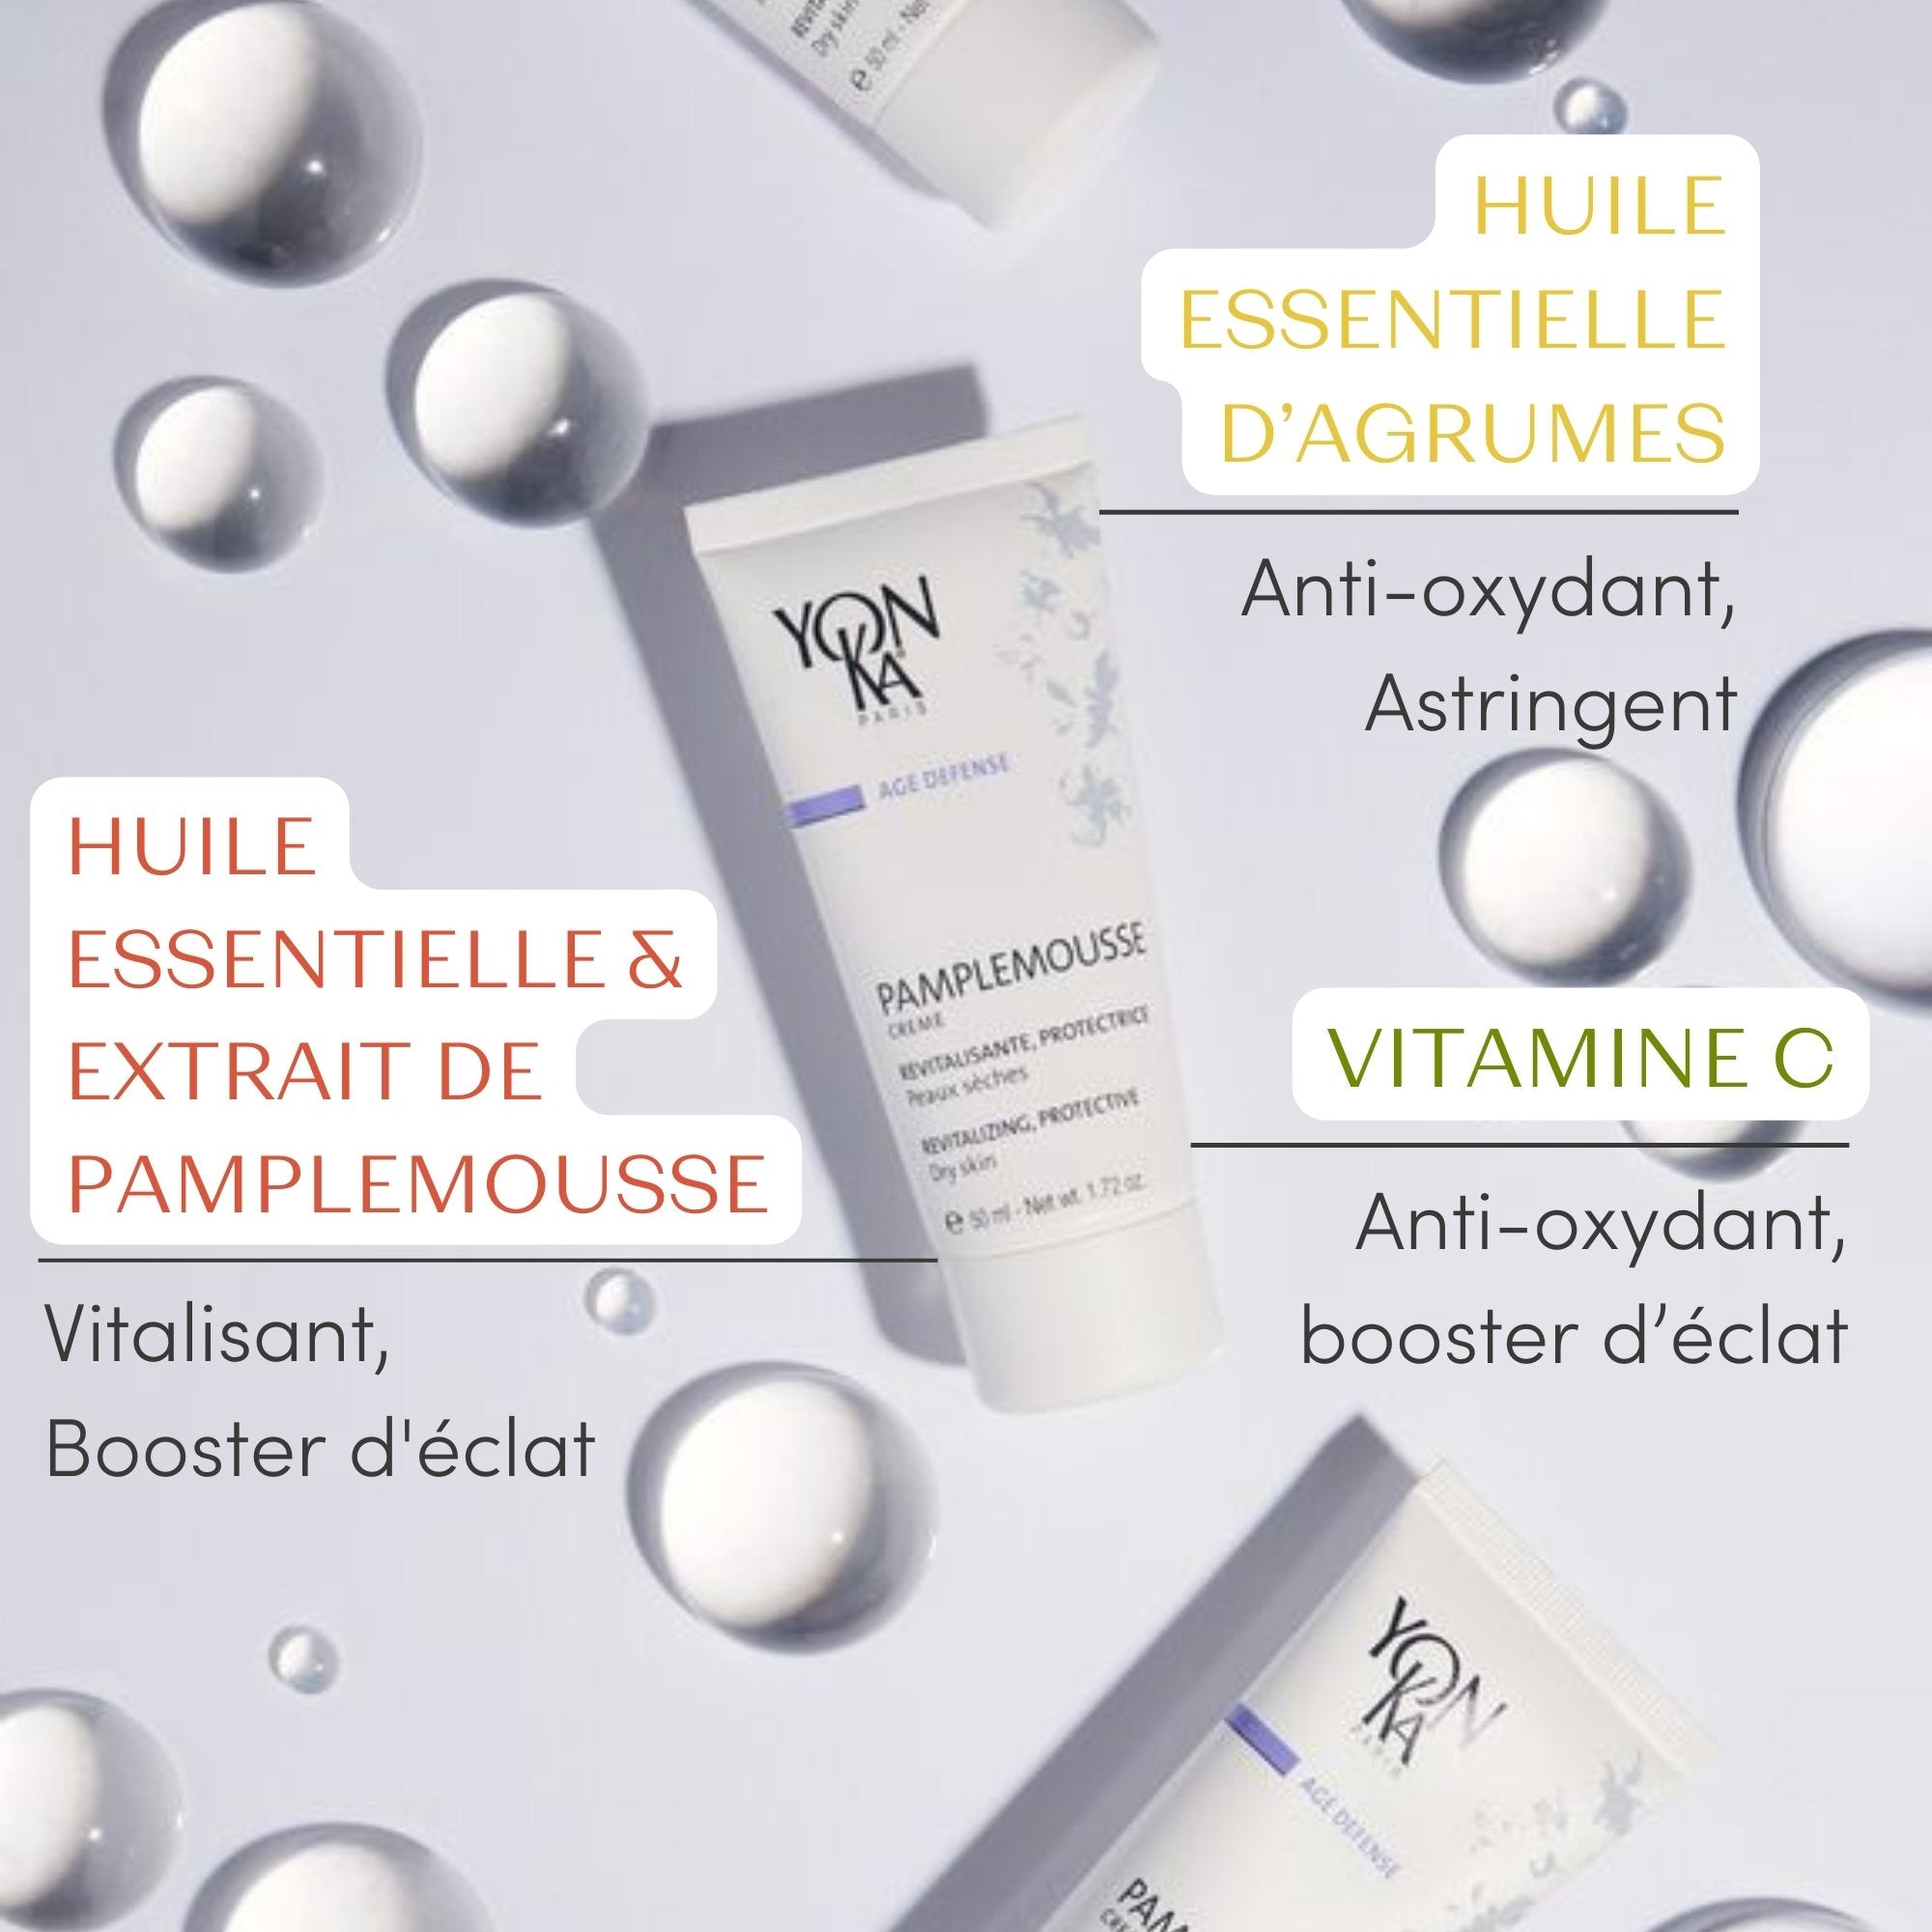 Pamplemousse - Protective cream - Dry Skin